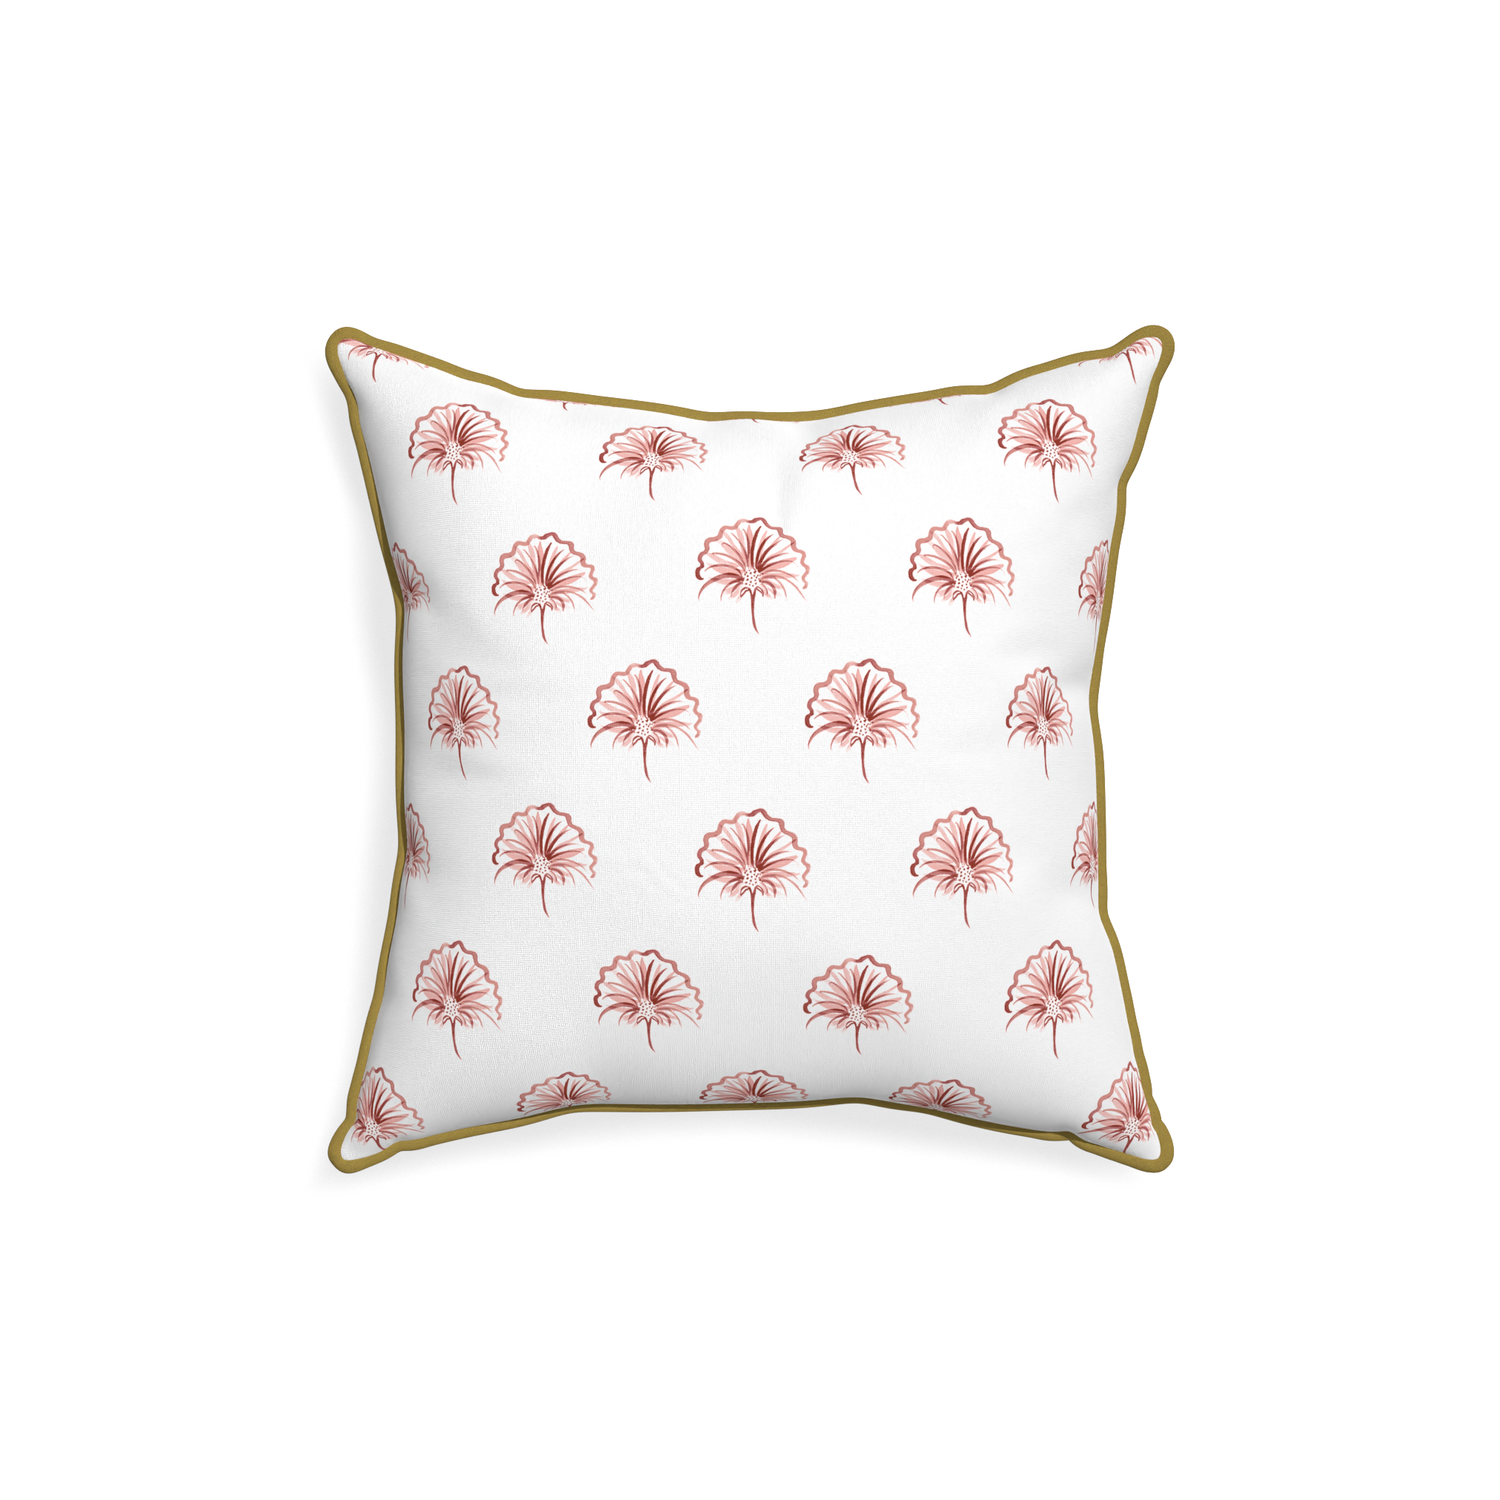 18-square penelope rose custom floral pinkpillow with c piping on white background